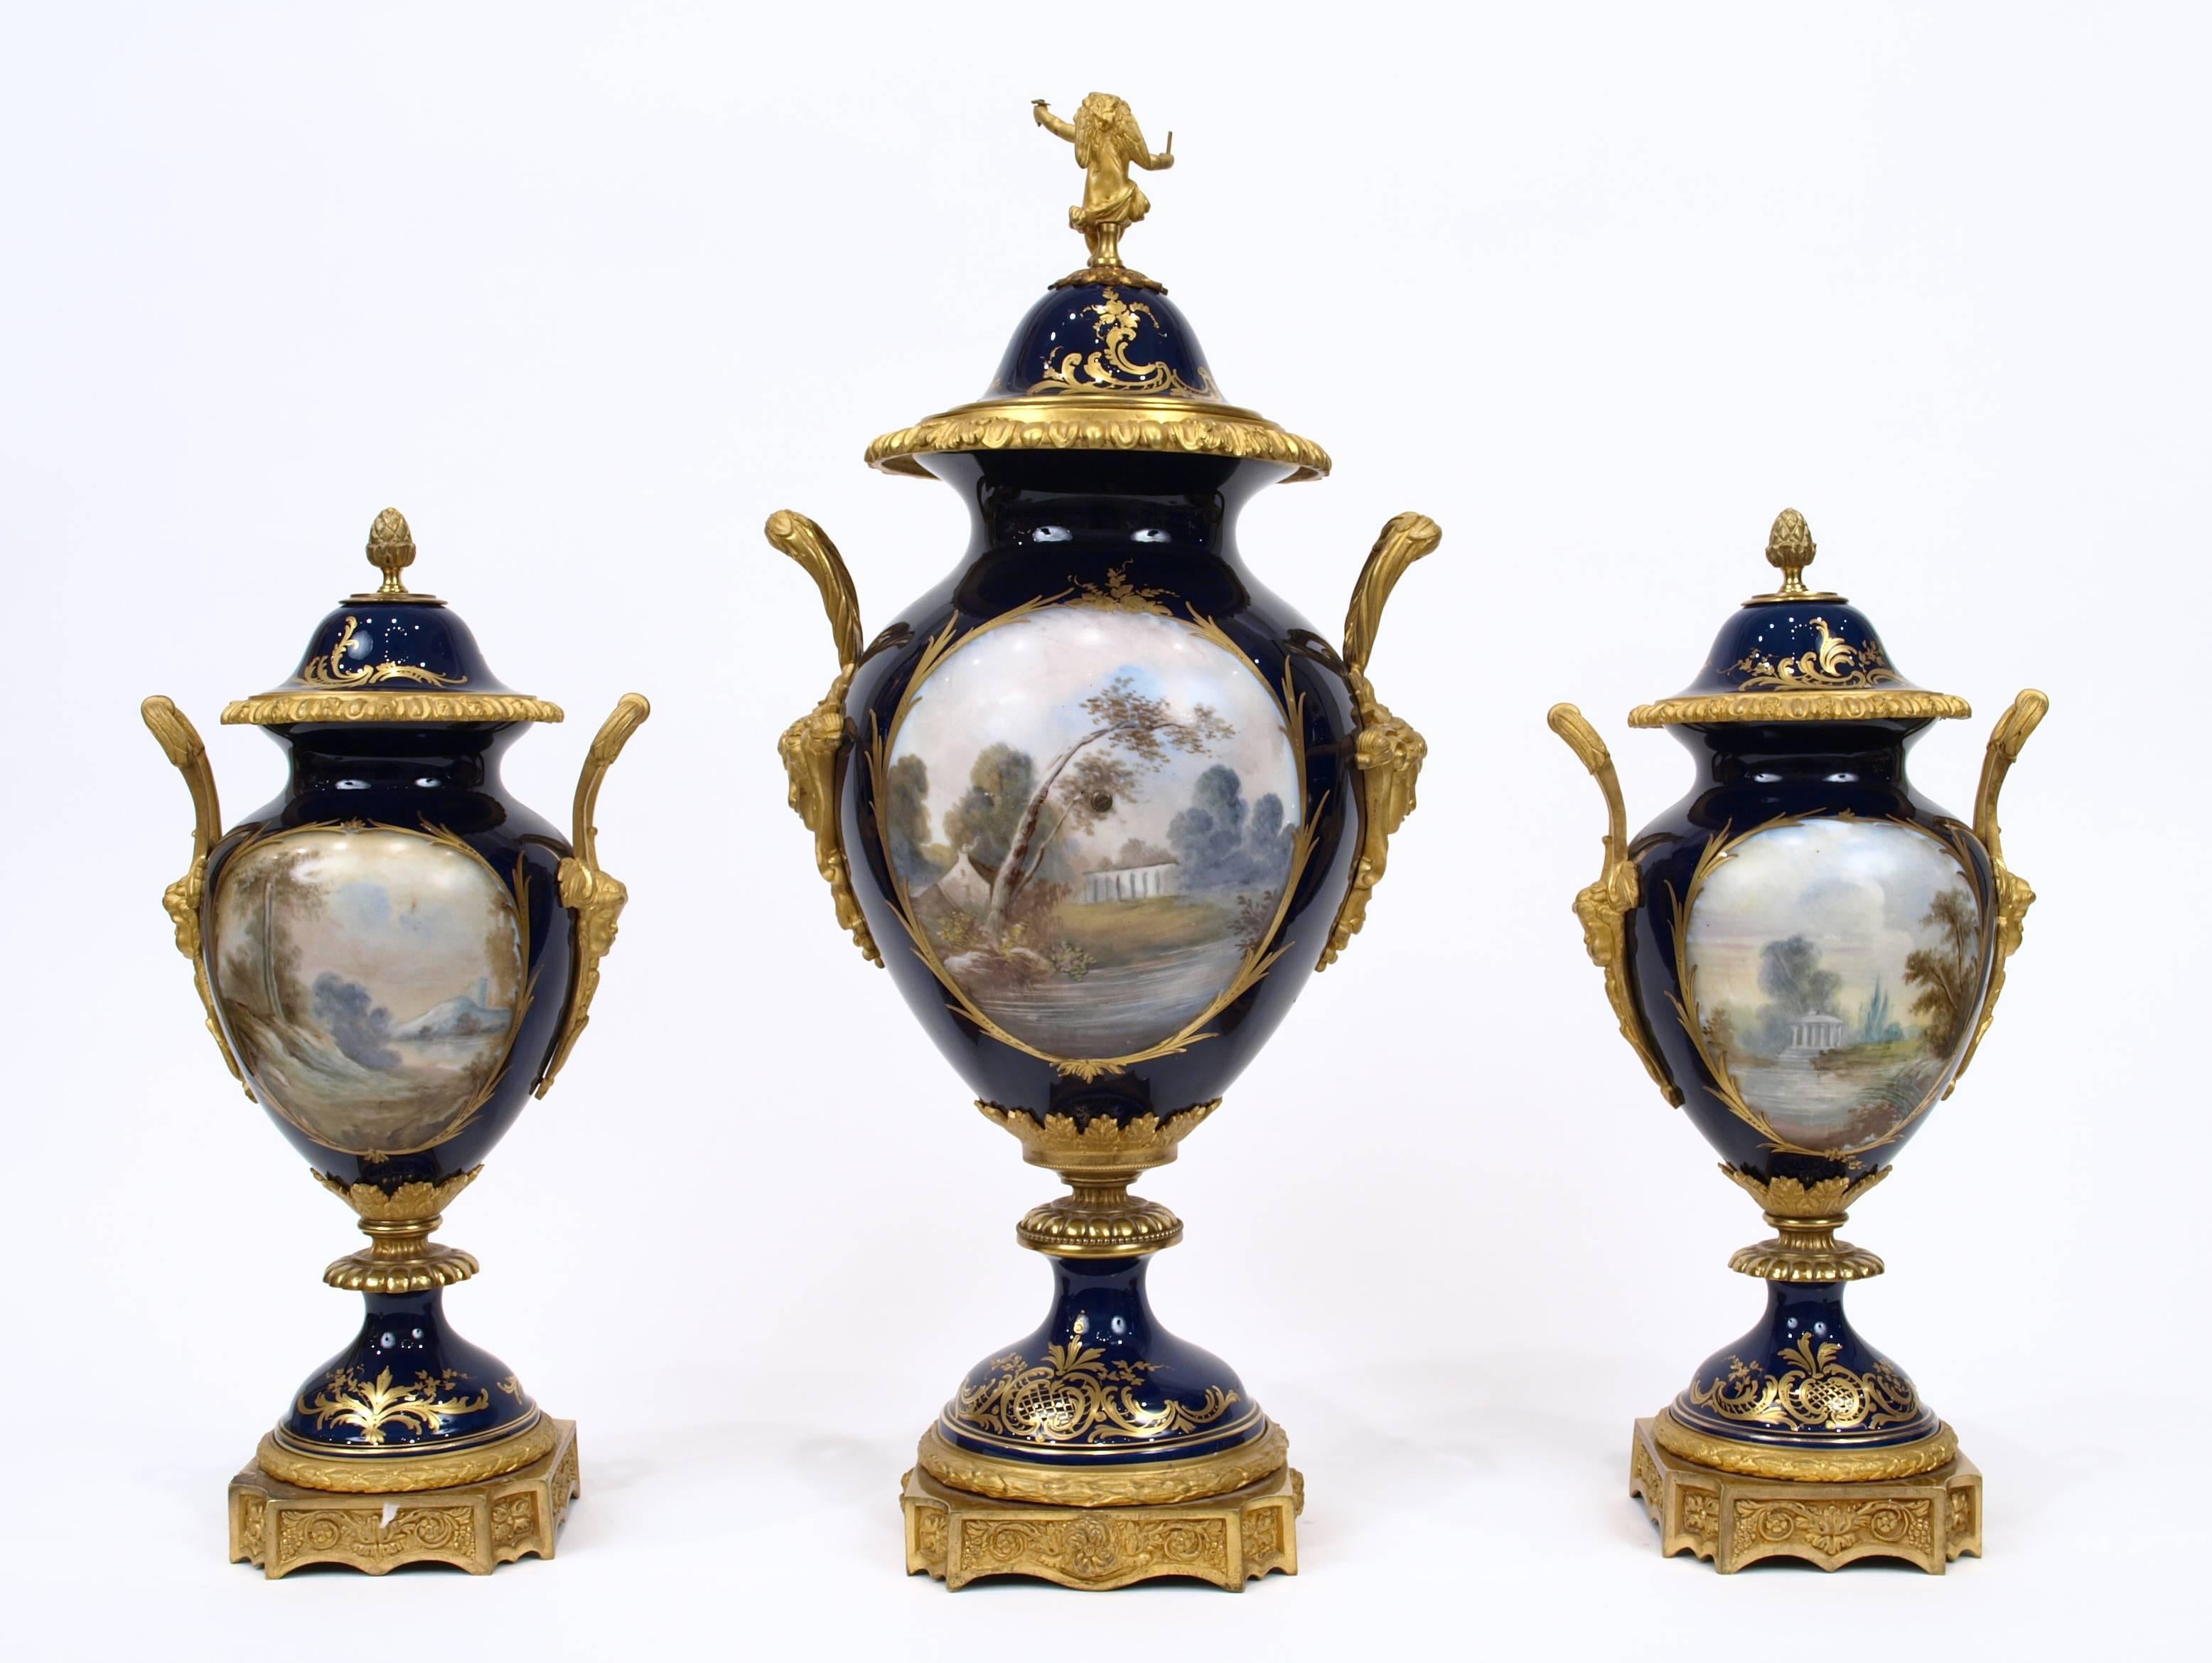 This fantastic porcelain clock garniture contains three vases, one of which has been mounted with a ormolu clock dial with jewels surrounding it. The vases are decorated in the style of the Sèvres Porcelain manufacturers, with cartouches to the